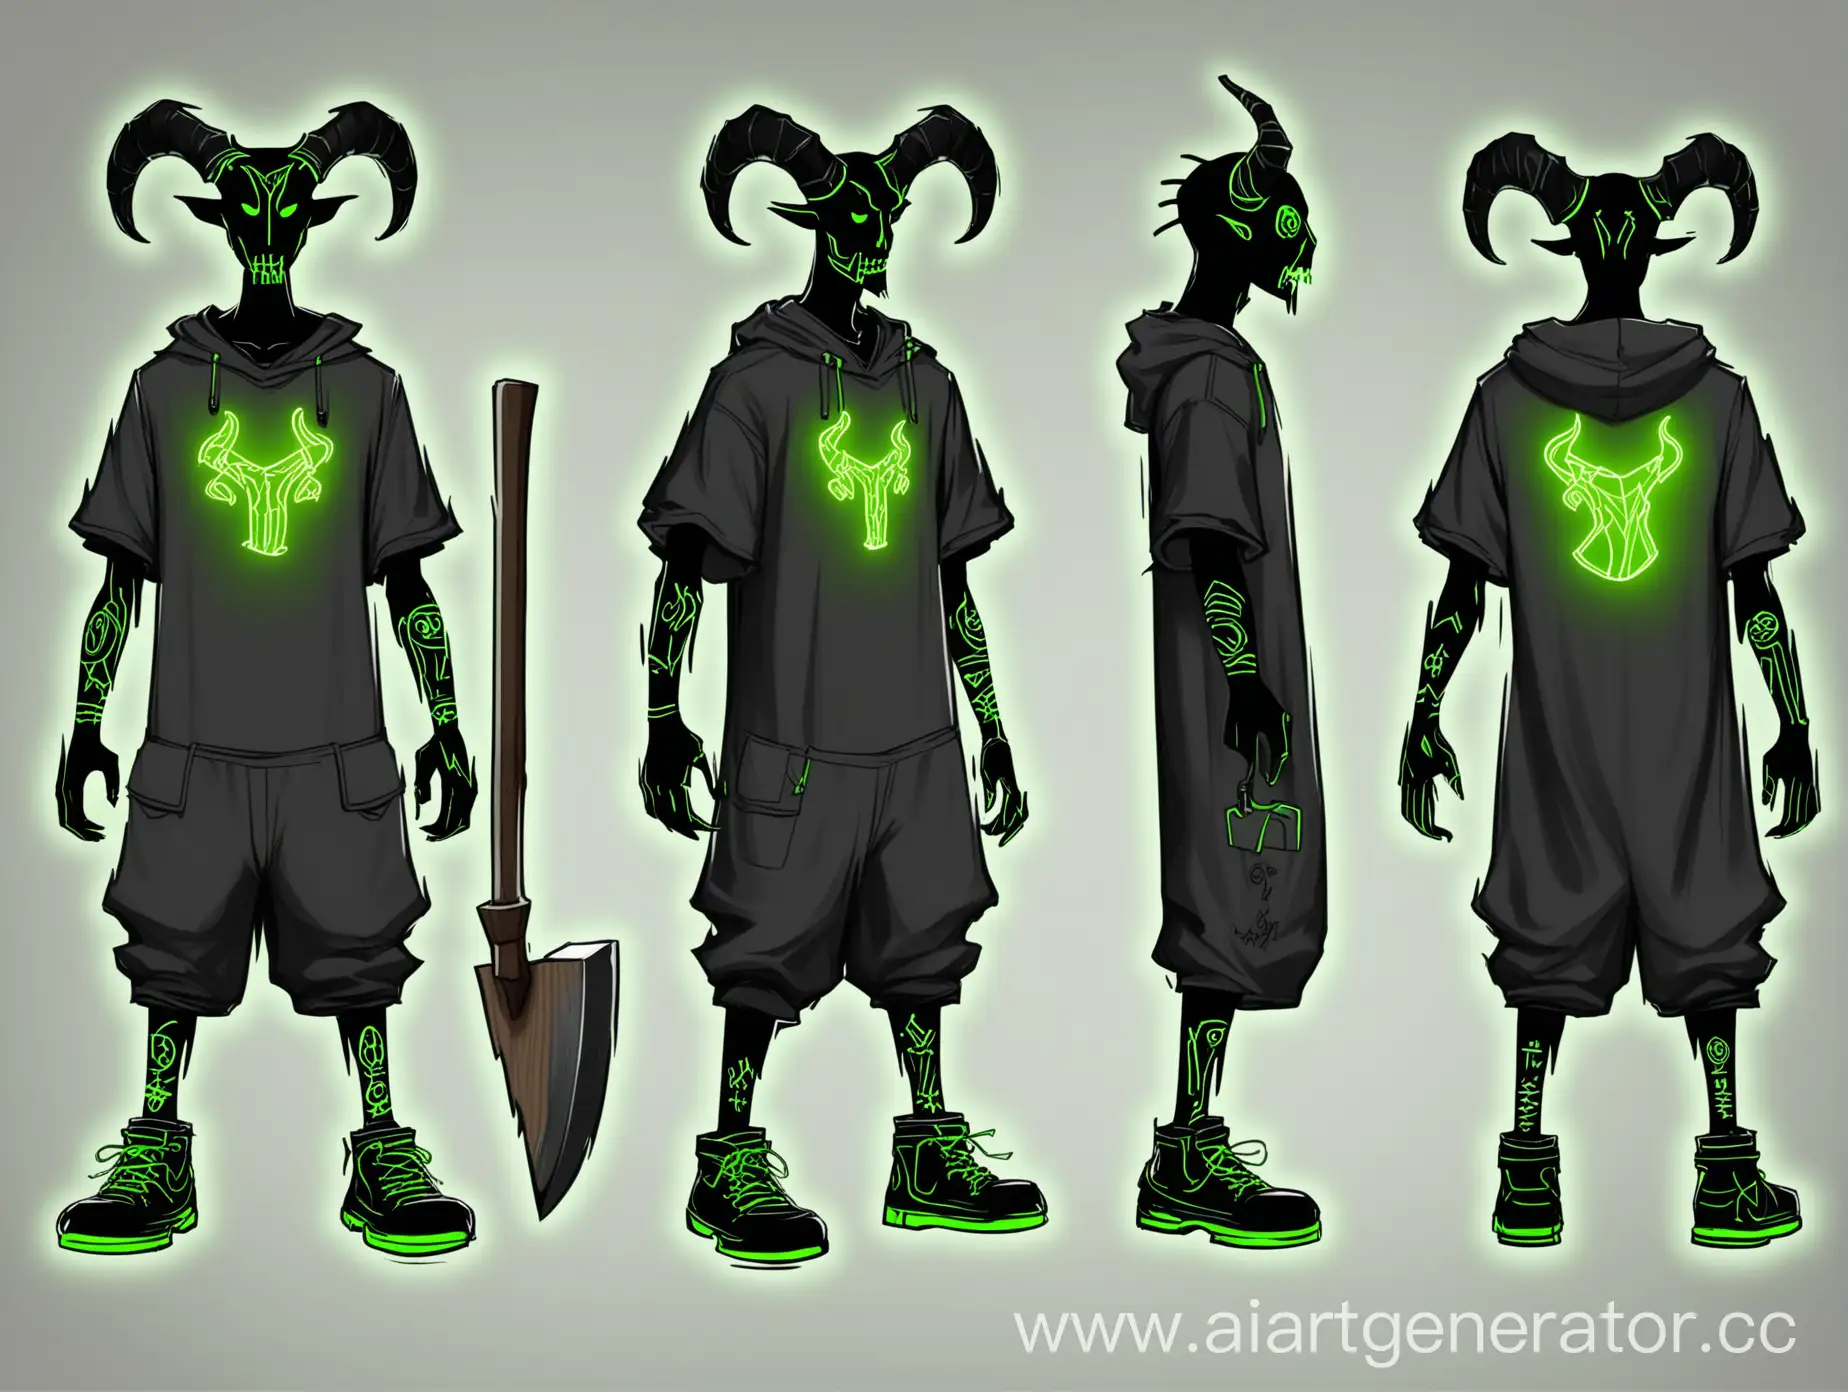 Neon-Tattoos-Stickman-with-Horns-and-Ax-in-Baggy-Clothes